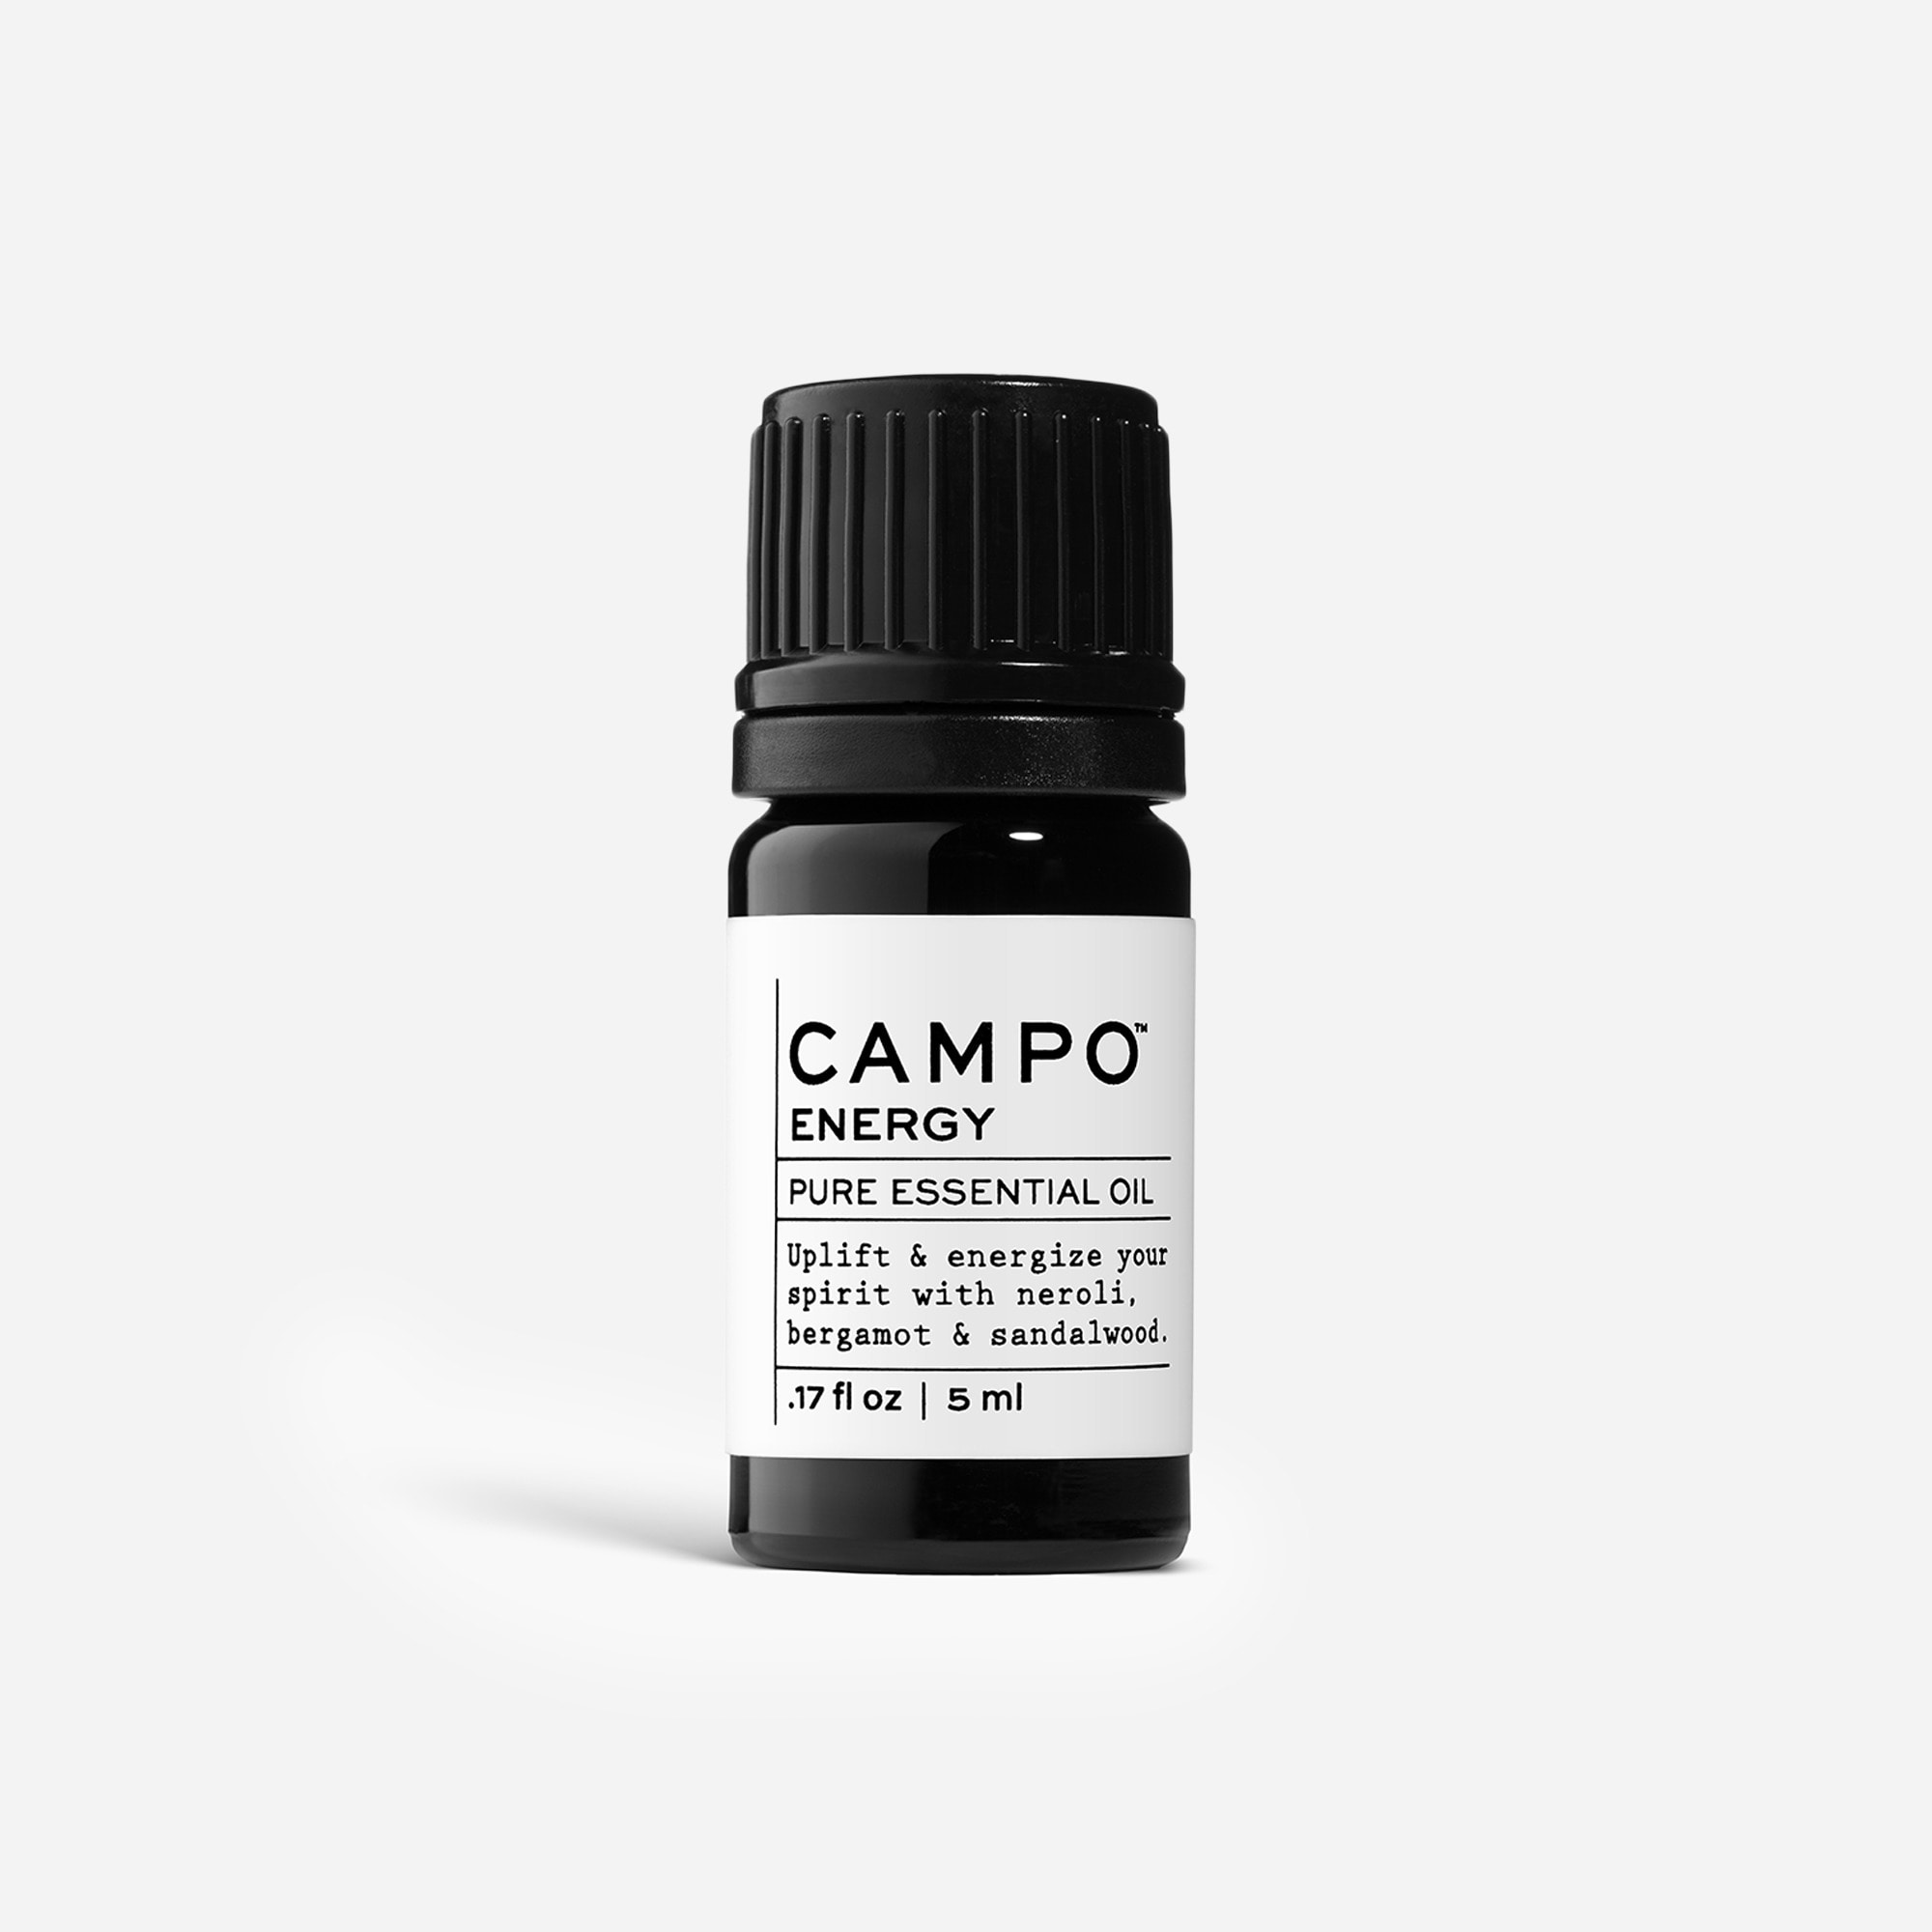  CAMPO® ENERGY pure essential oil blend